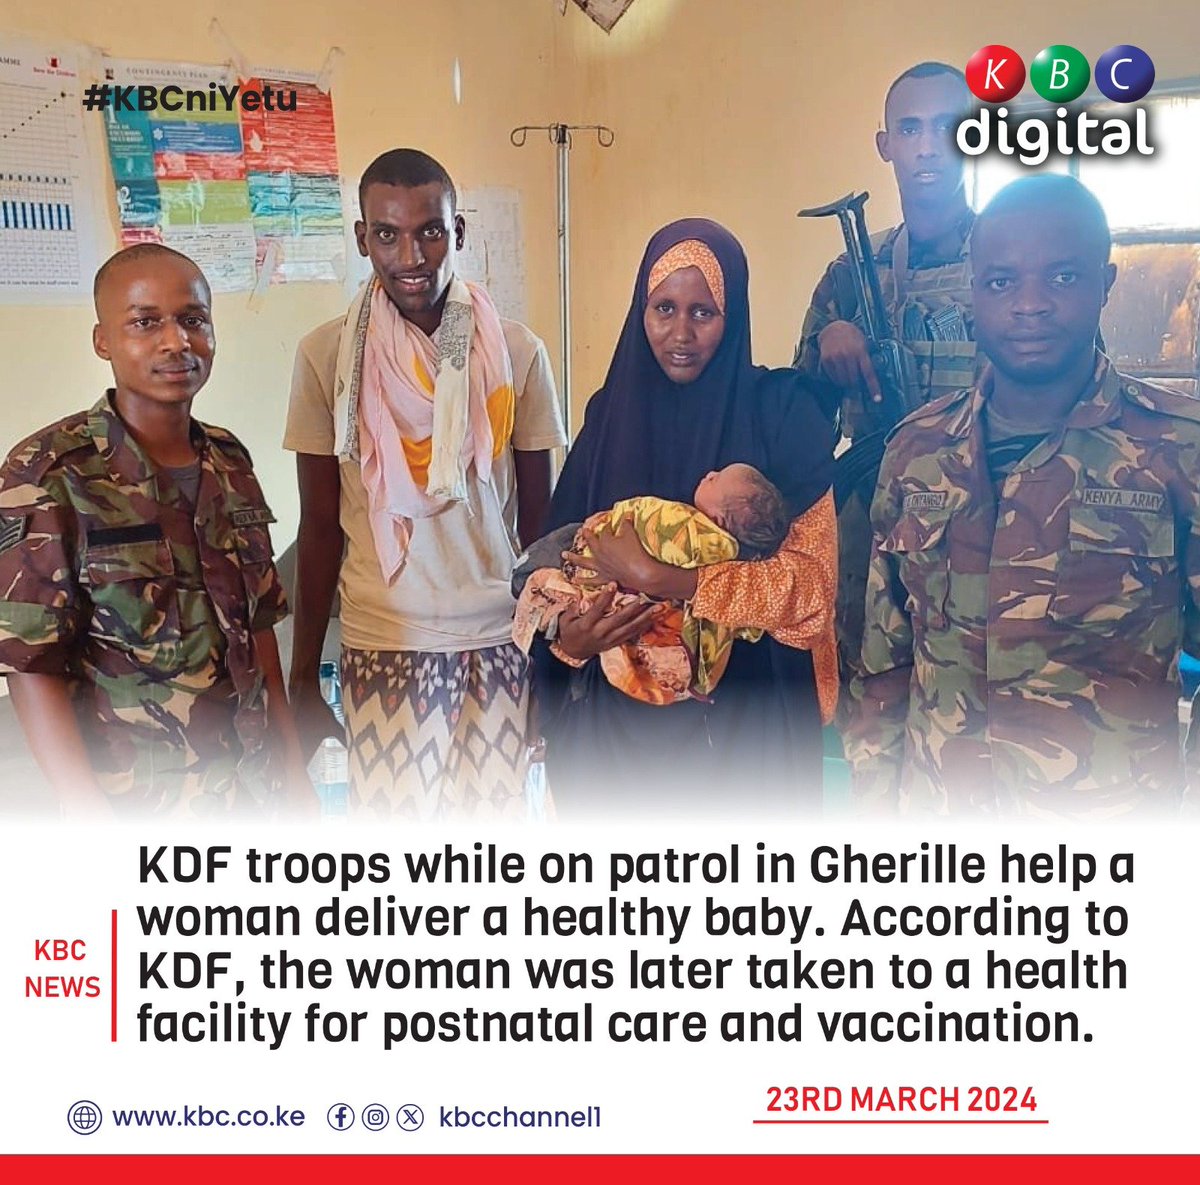 KDF troops while on patrol in Gherille help a woman deliver a healthy baby. #KBCniYetu ^RO